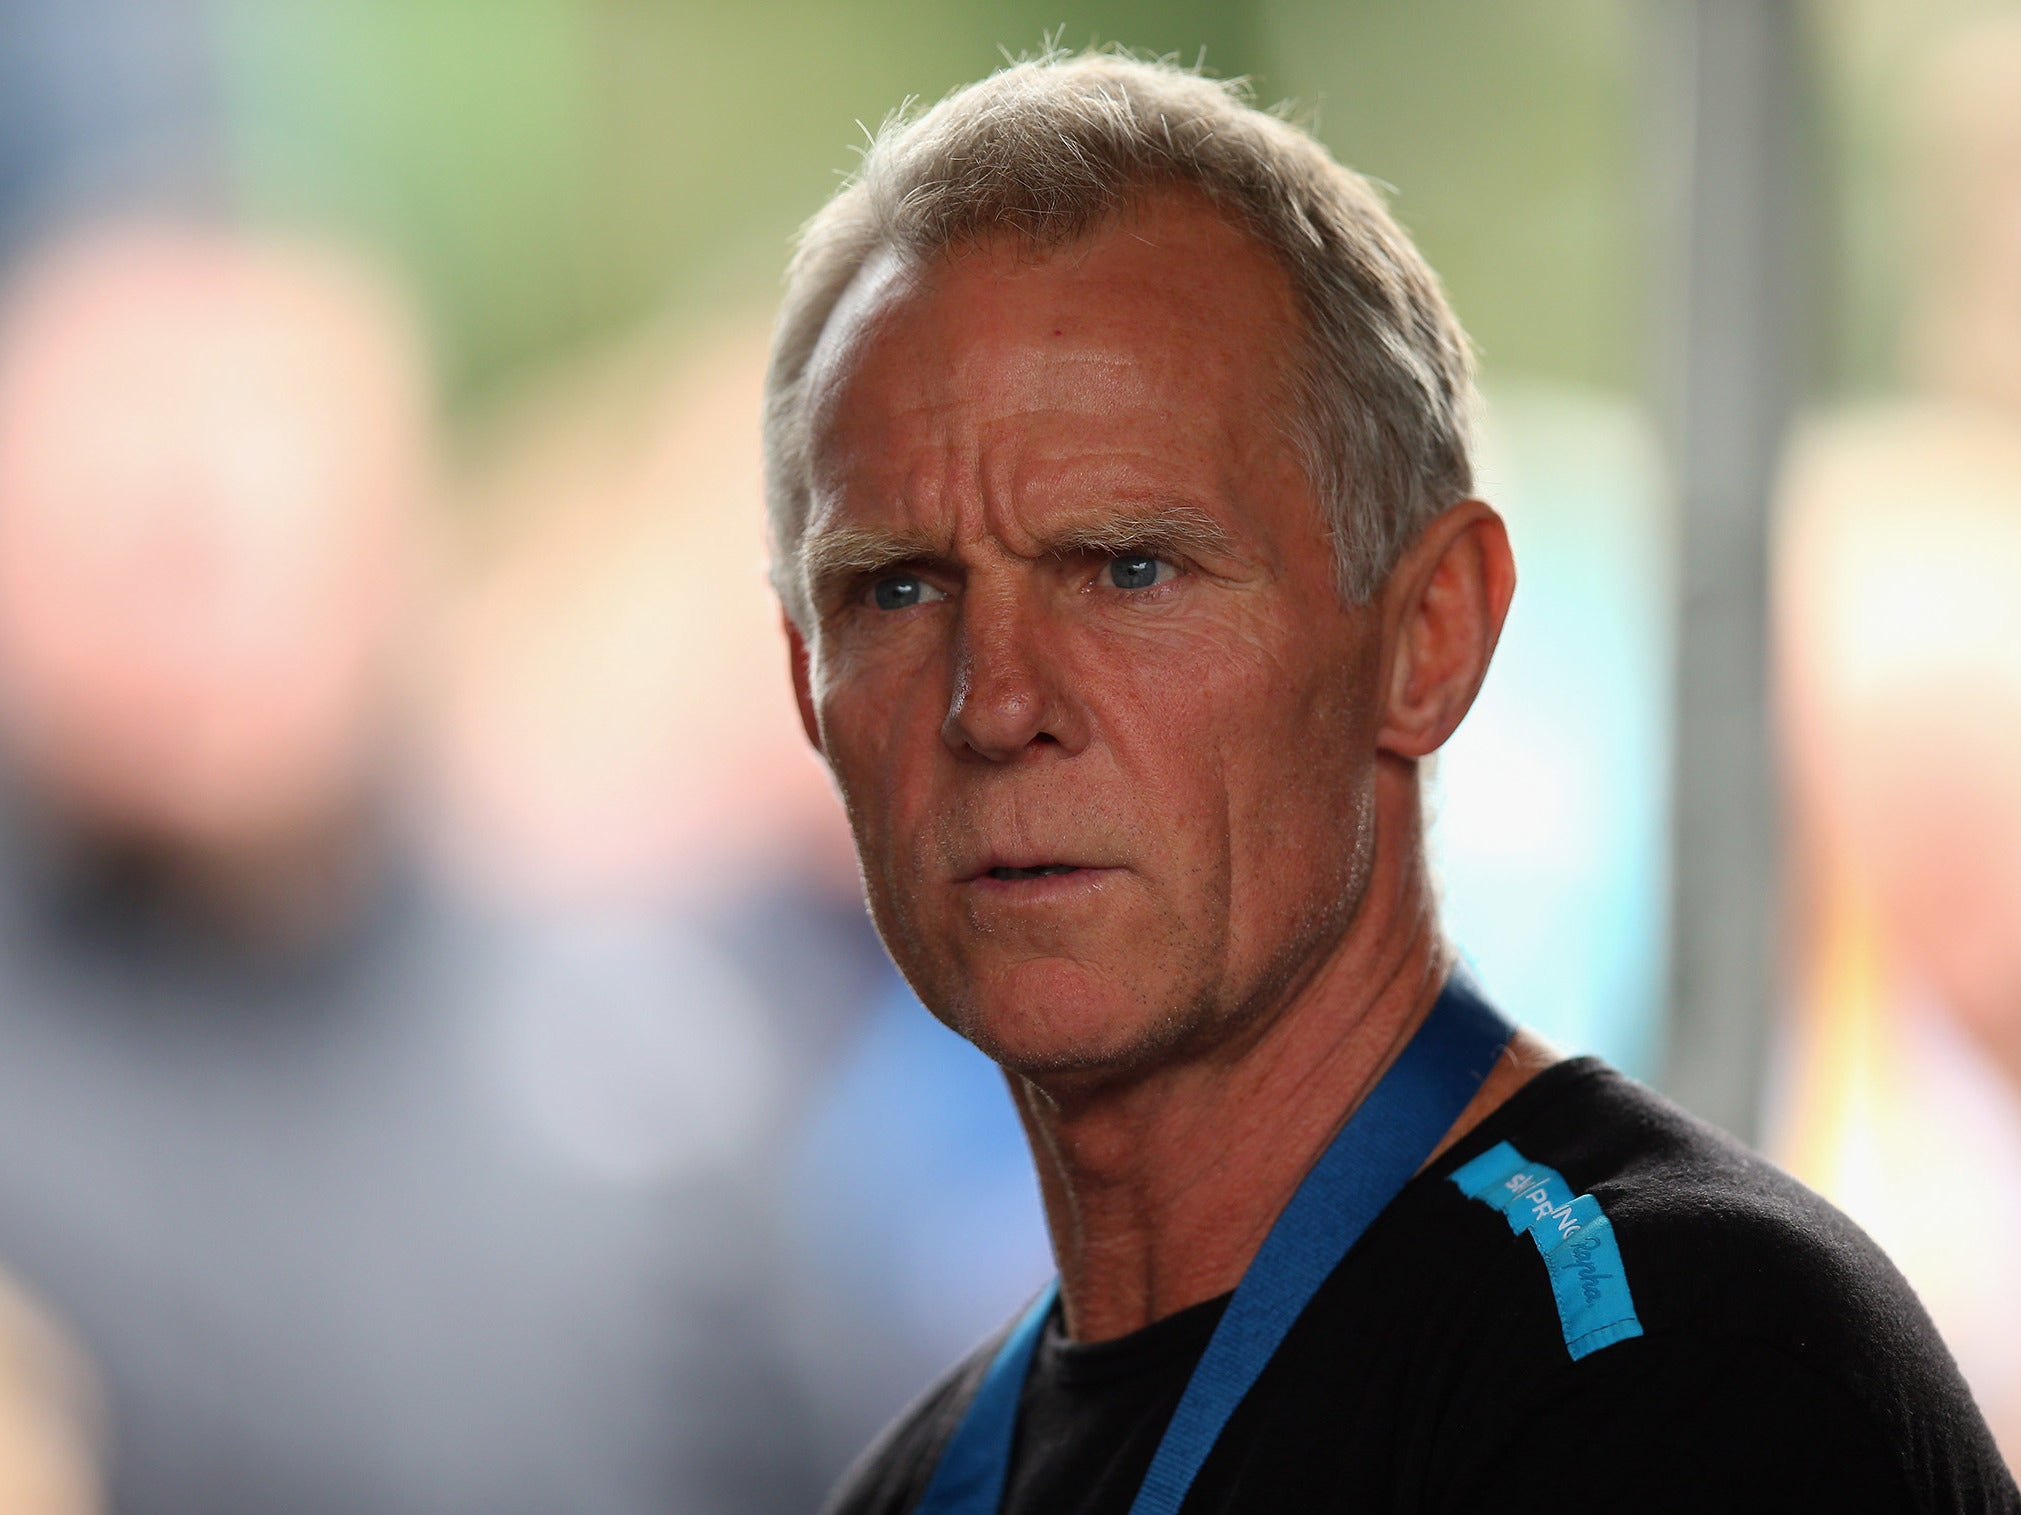 Shane Sutton had a key coaching role at Team Sky from 2010-13